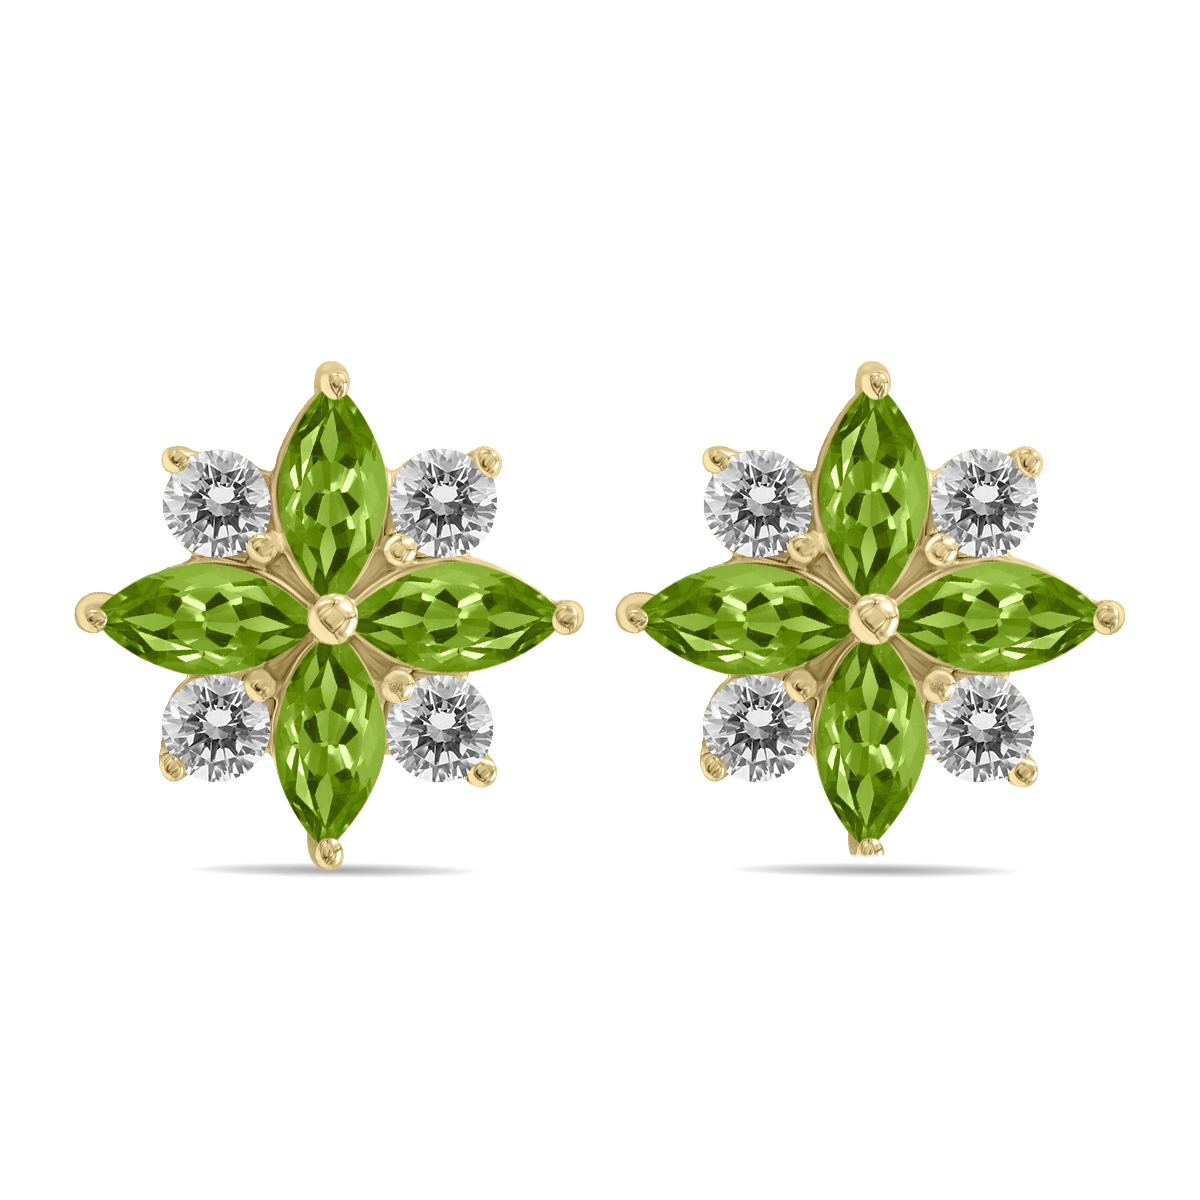 Image of 1 Carat TW Peridot and Diamond Flower Earrings in 10K Yellow Gold